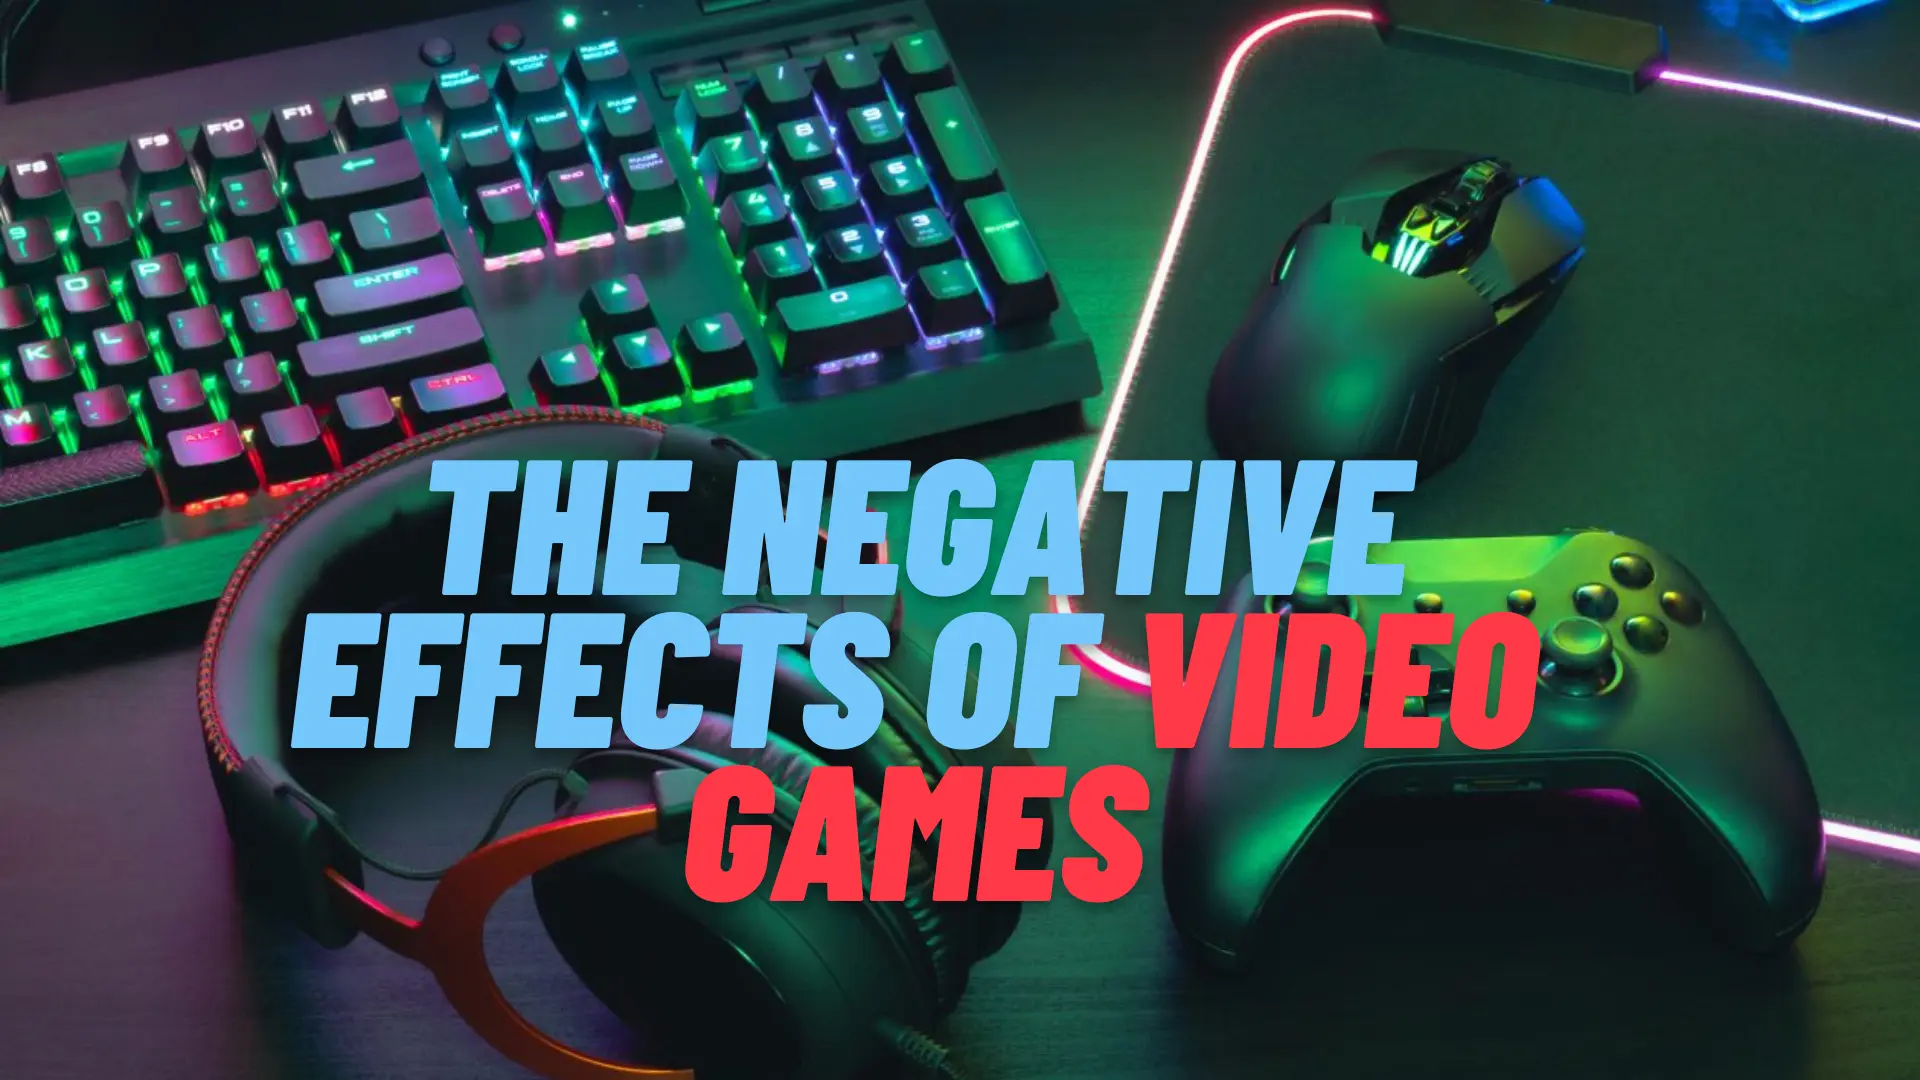 The Negative Effects of Video Games and How to Deal with Them